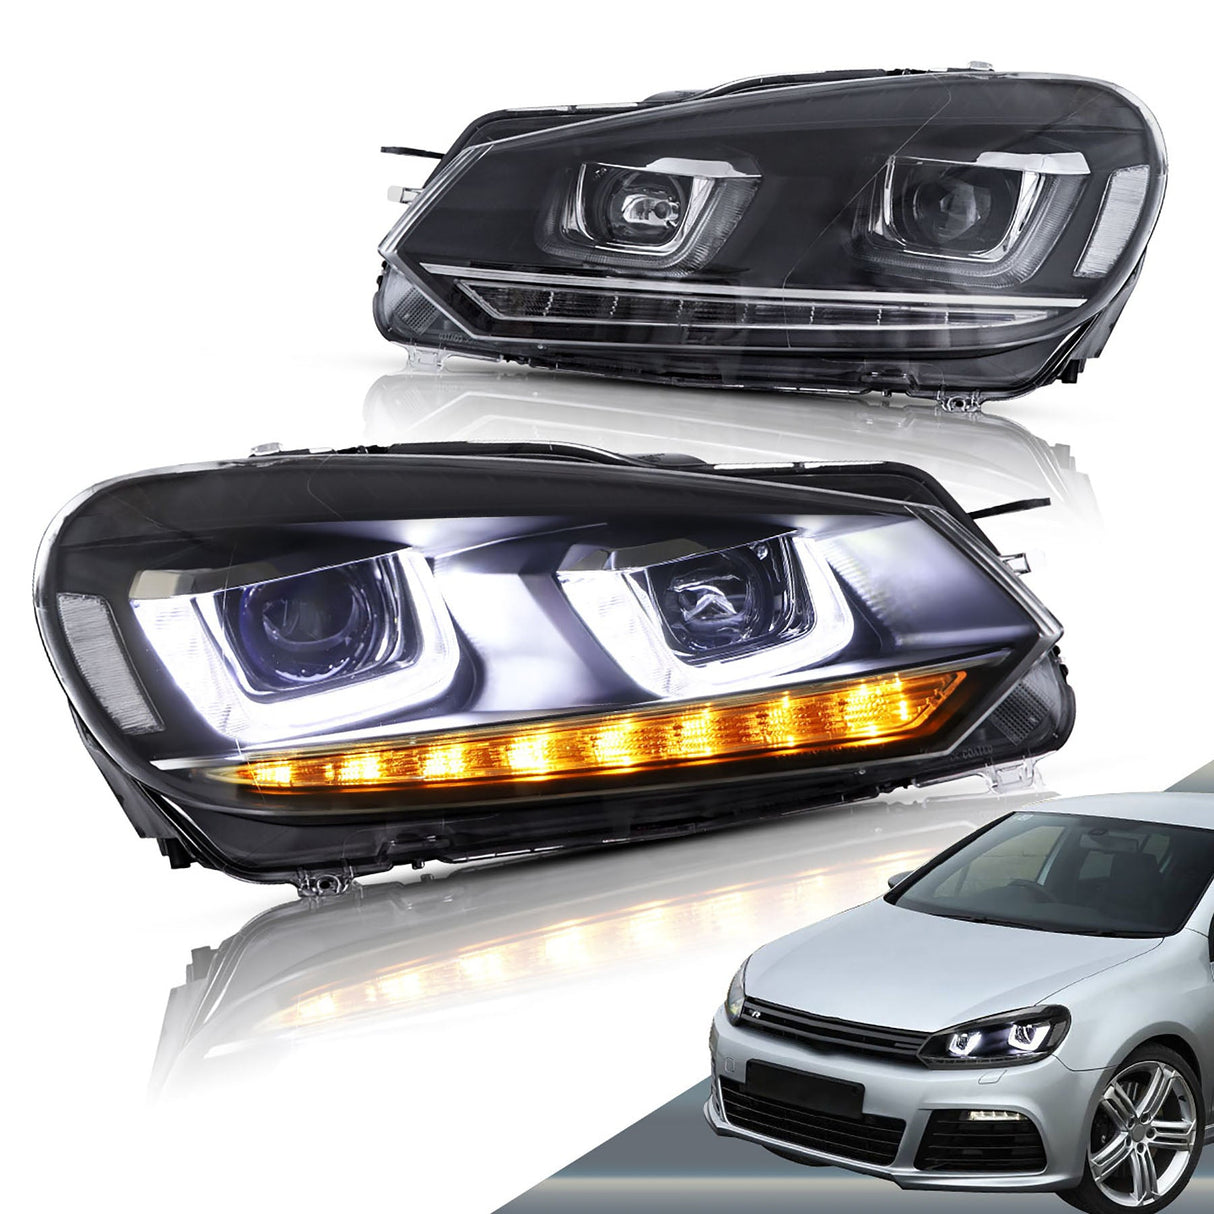 LED DUAL HALO PROJECTOR HEADLIGHTS FOR VOLKSWAGEN GOLF 6 MK6 (2009-2012)